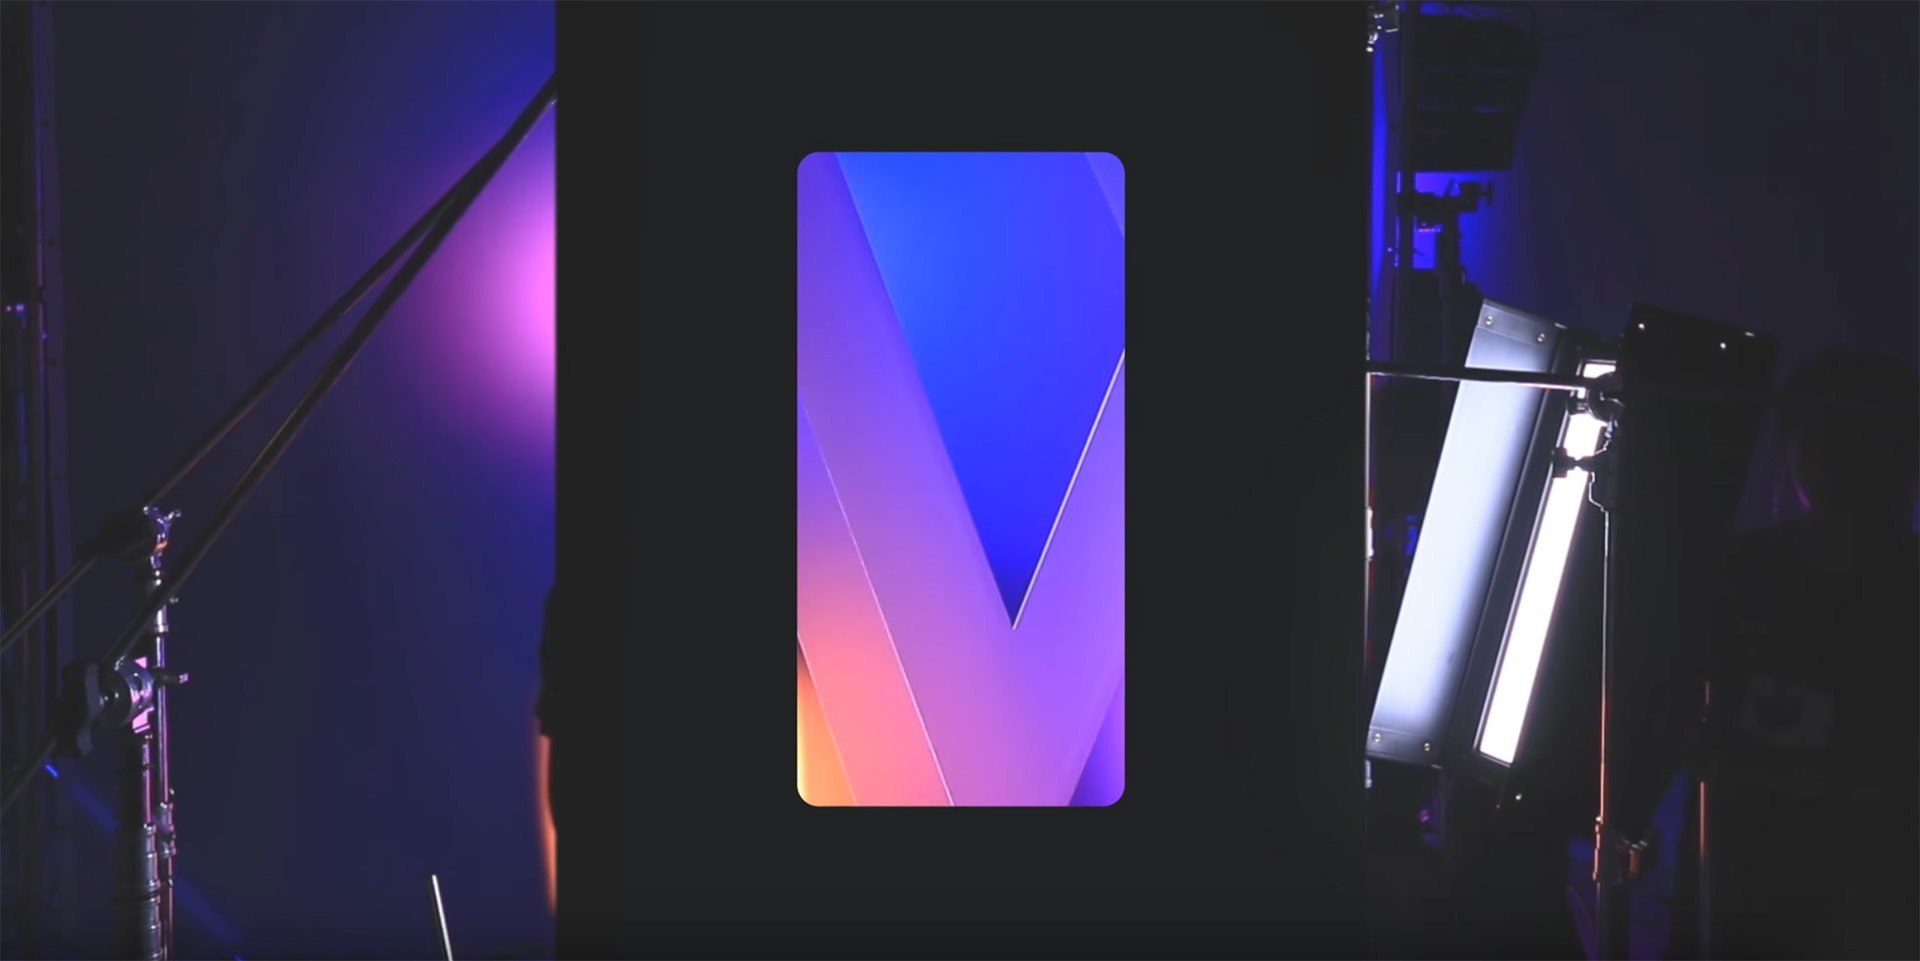 Behind the Scenes of the Wallpaper Design for the LG V30